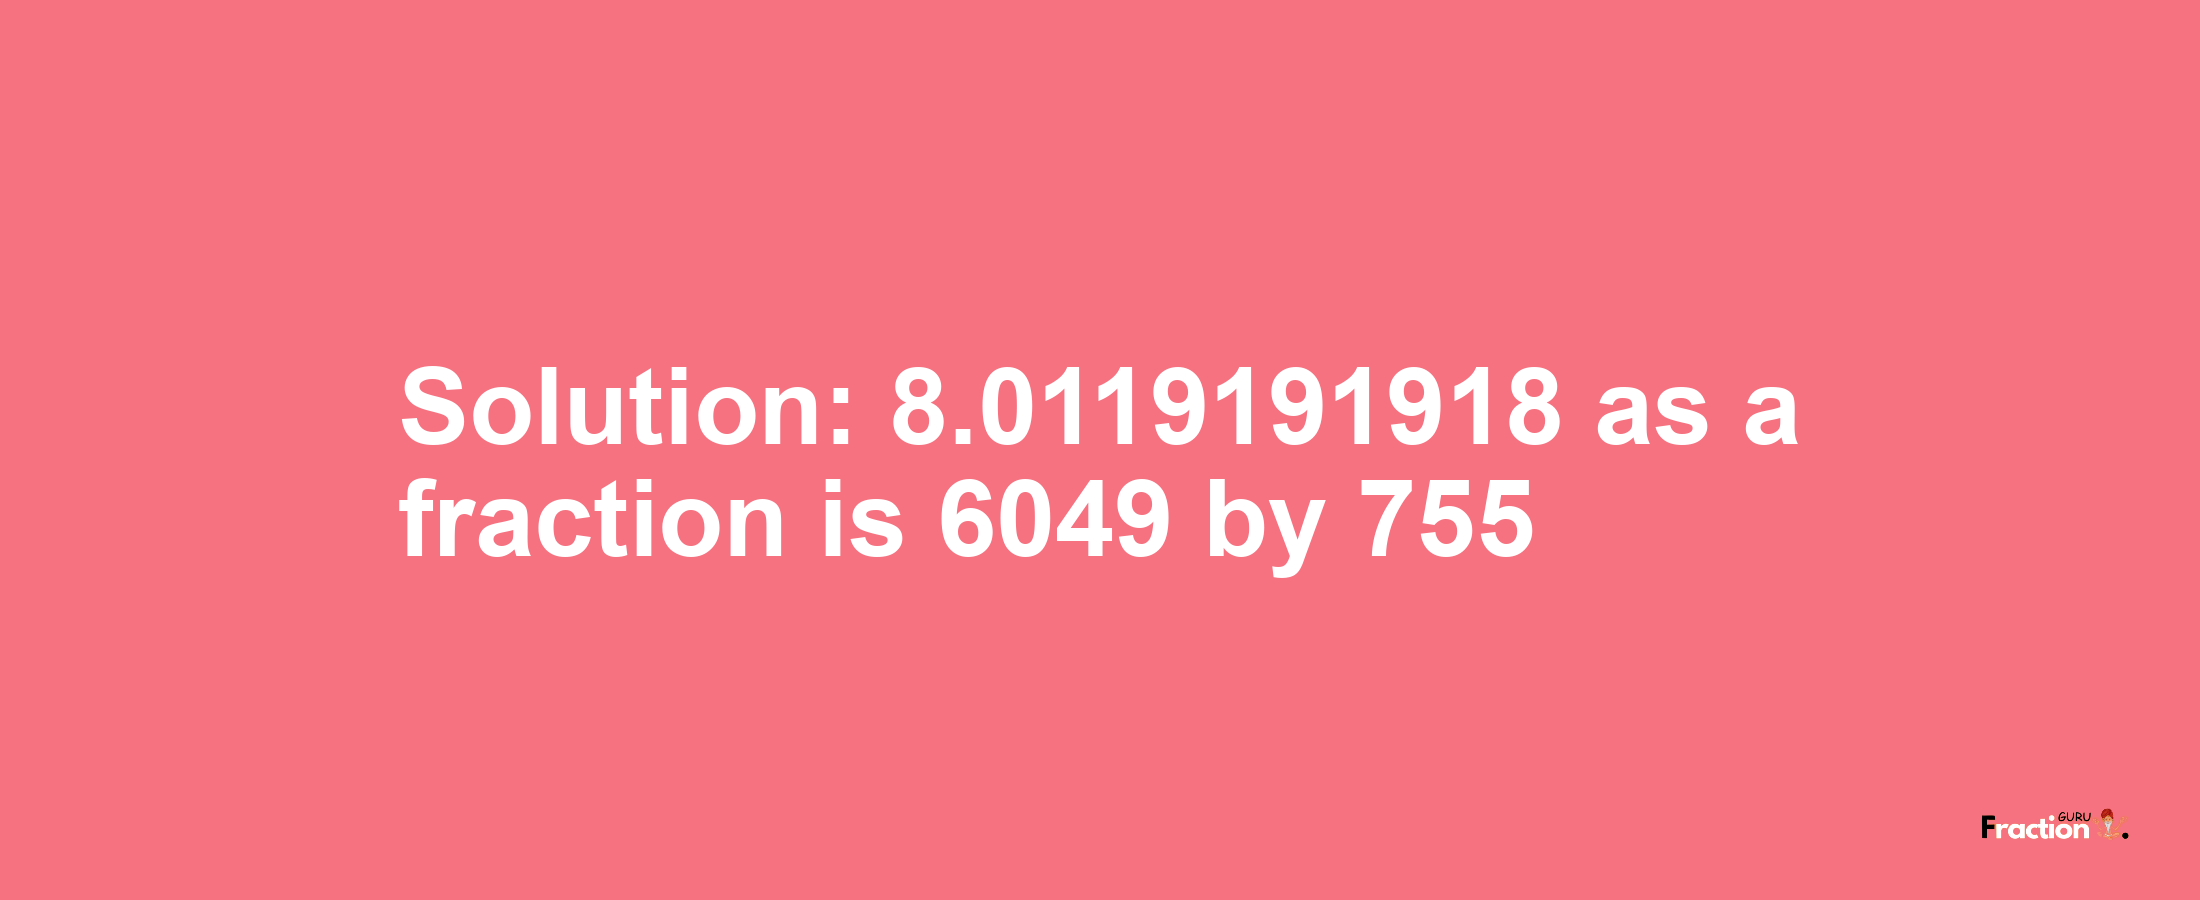 Solution:8.0119191918 as a fraction is 6049/755